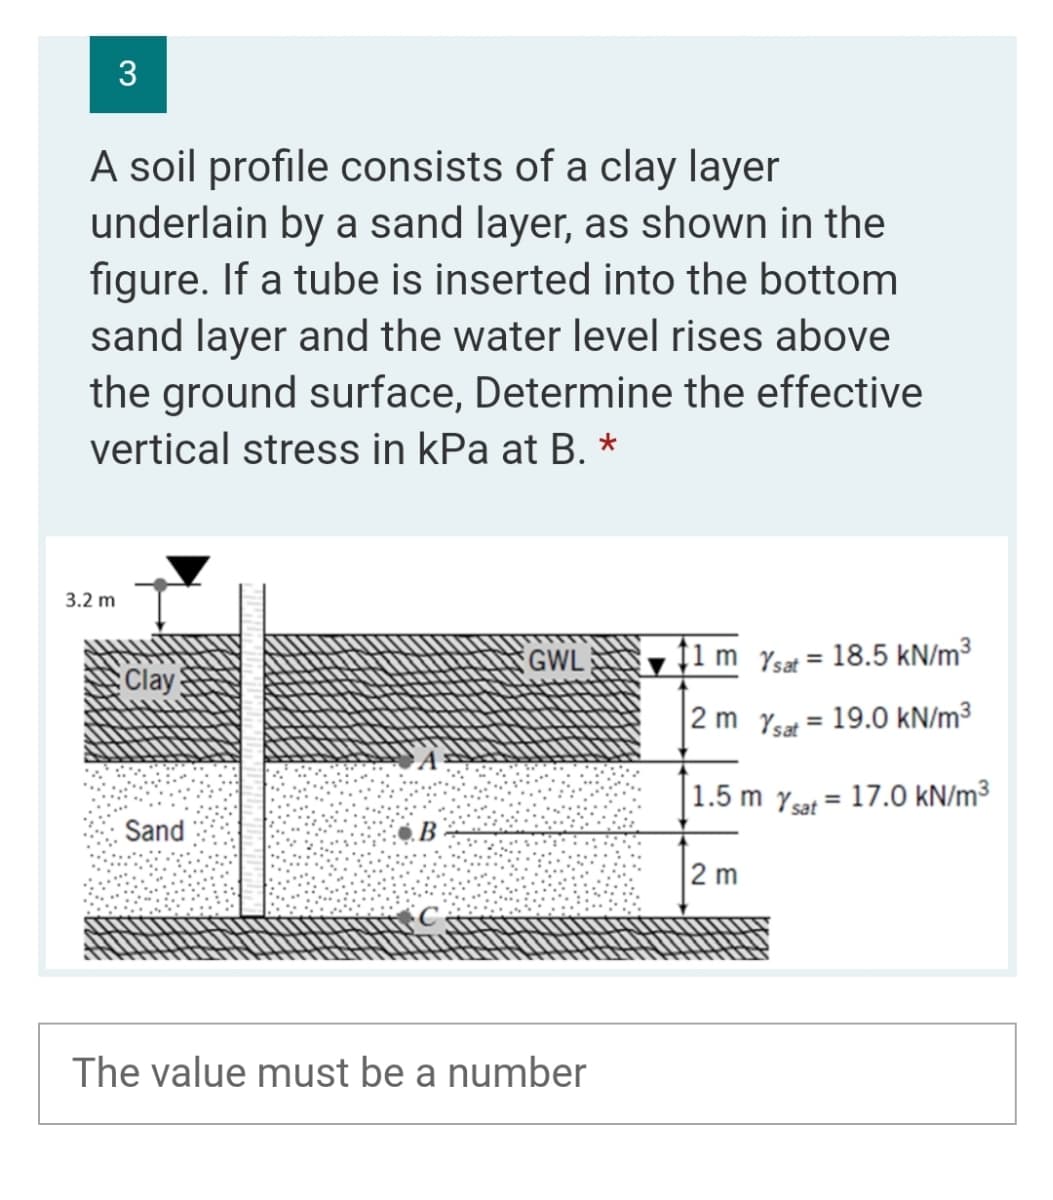 3
A soil profile consists of a clay layer
underlain by a sand layer, as shown in the
figure. If a tube is inserted into the bottom
sand layer and the water level rises above
the ground surface, Determine the effective
vertical stress in kPa at B. *
3.2 m
GWL ↑1 m Yst = 18.5 kN/m³
%3D
Clay
2 m Ysat = 19.0 kN/m³
%3D
|1.5 m Ysat = 17.0 kN/m³
%3D
Sand
В
2 m
The value must be a number
